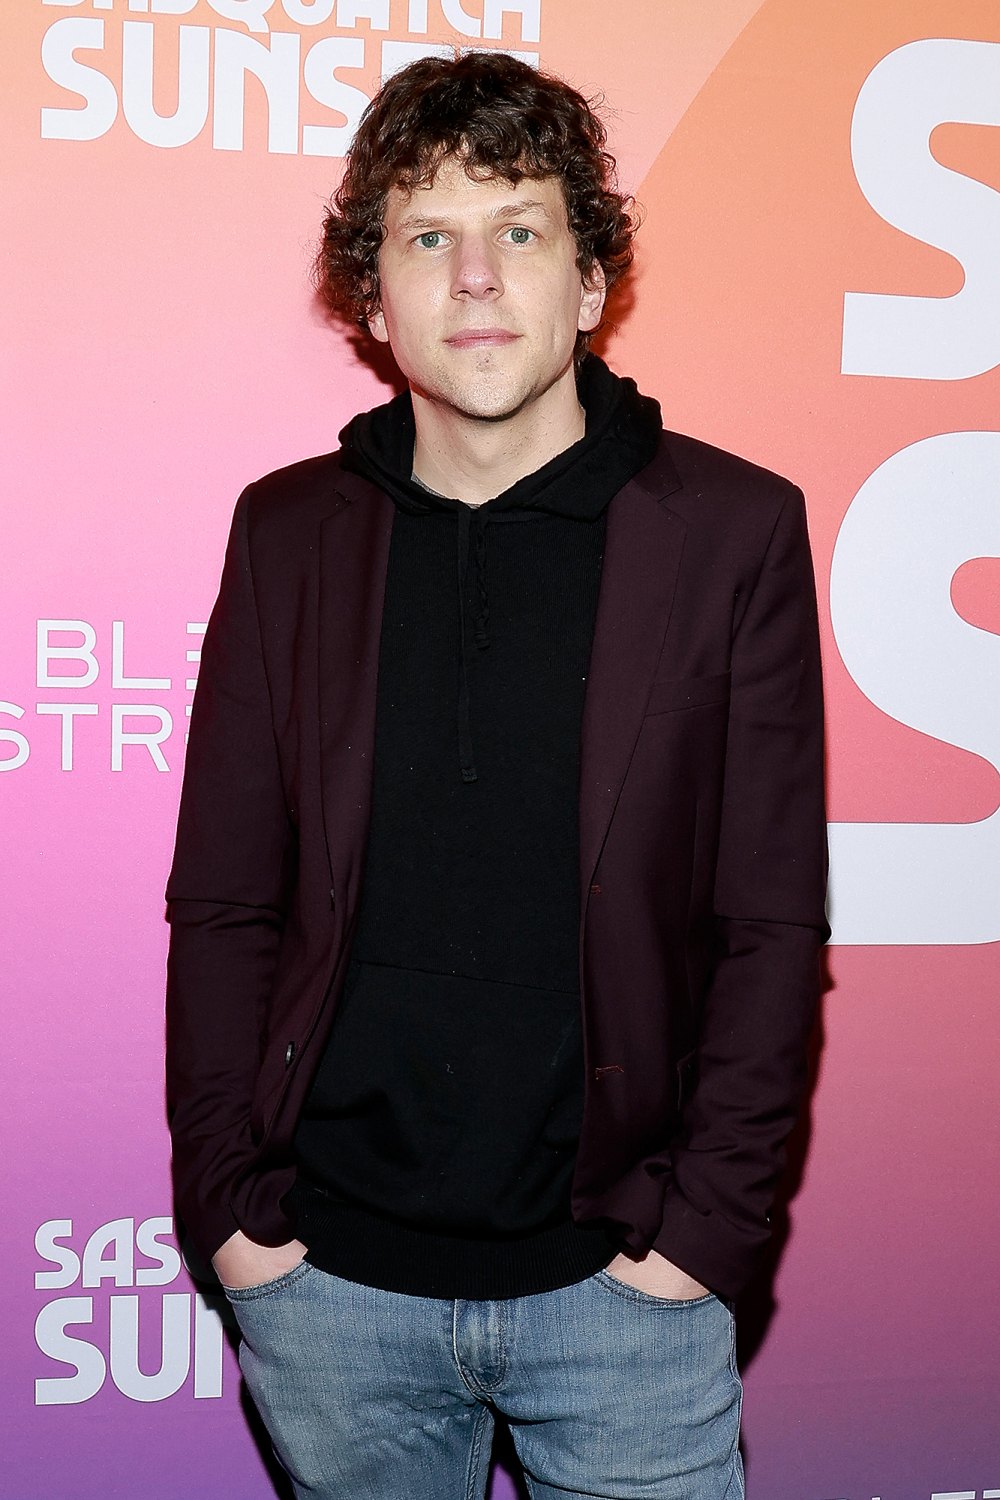 Jesse Eisenberg Says He Applied for Polish Citizenship: 'Waiting for the Final Signature'